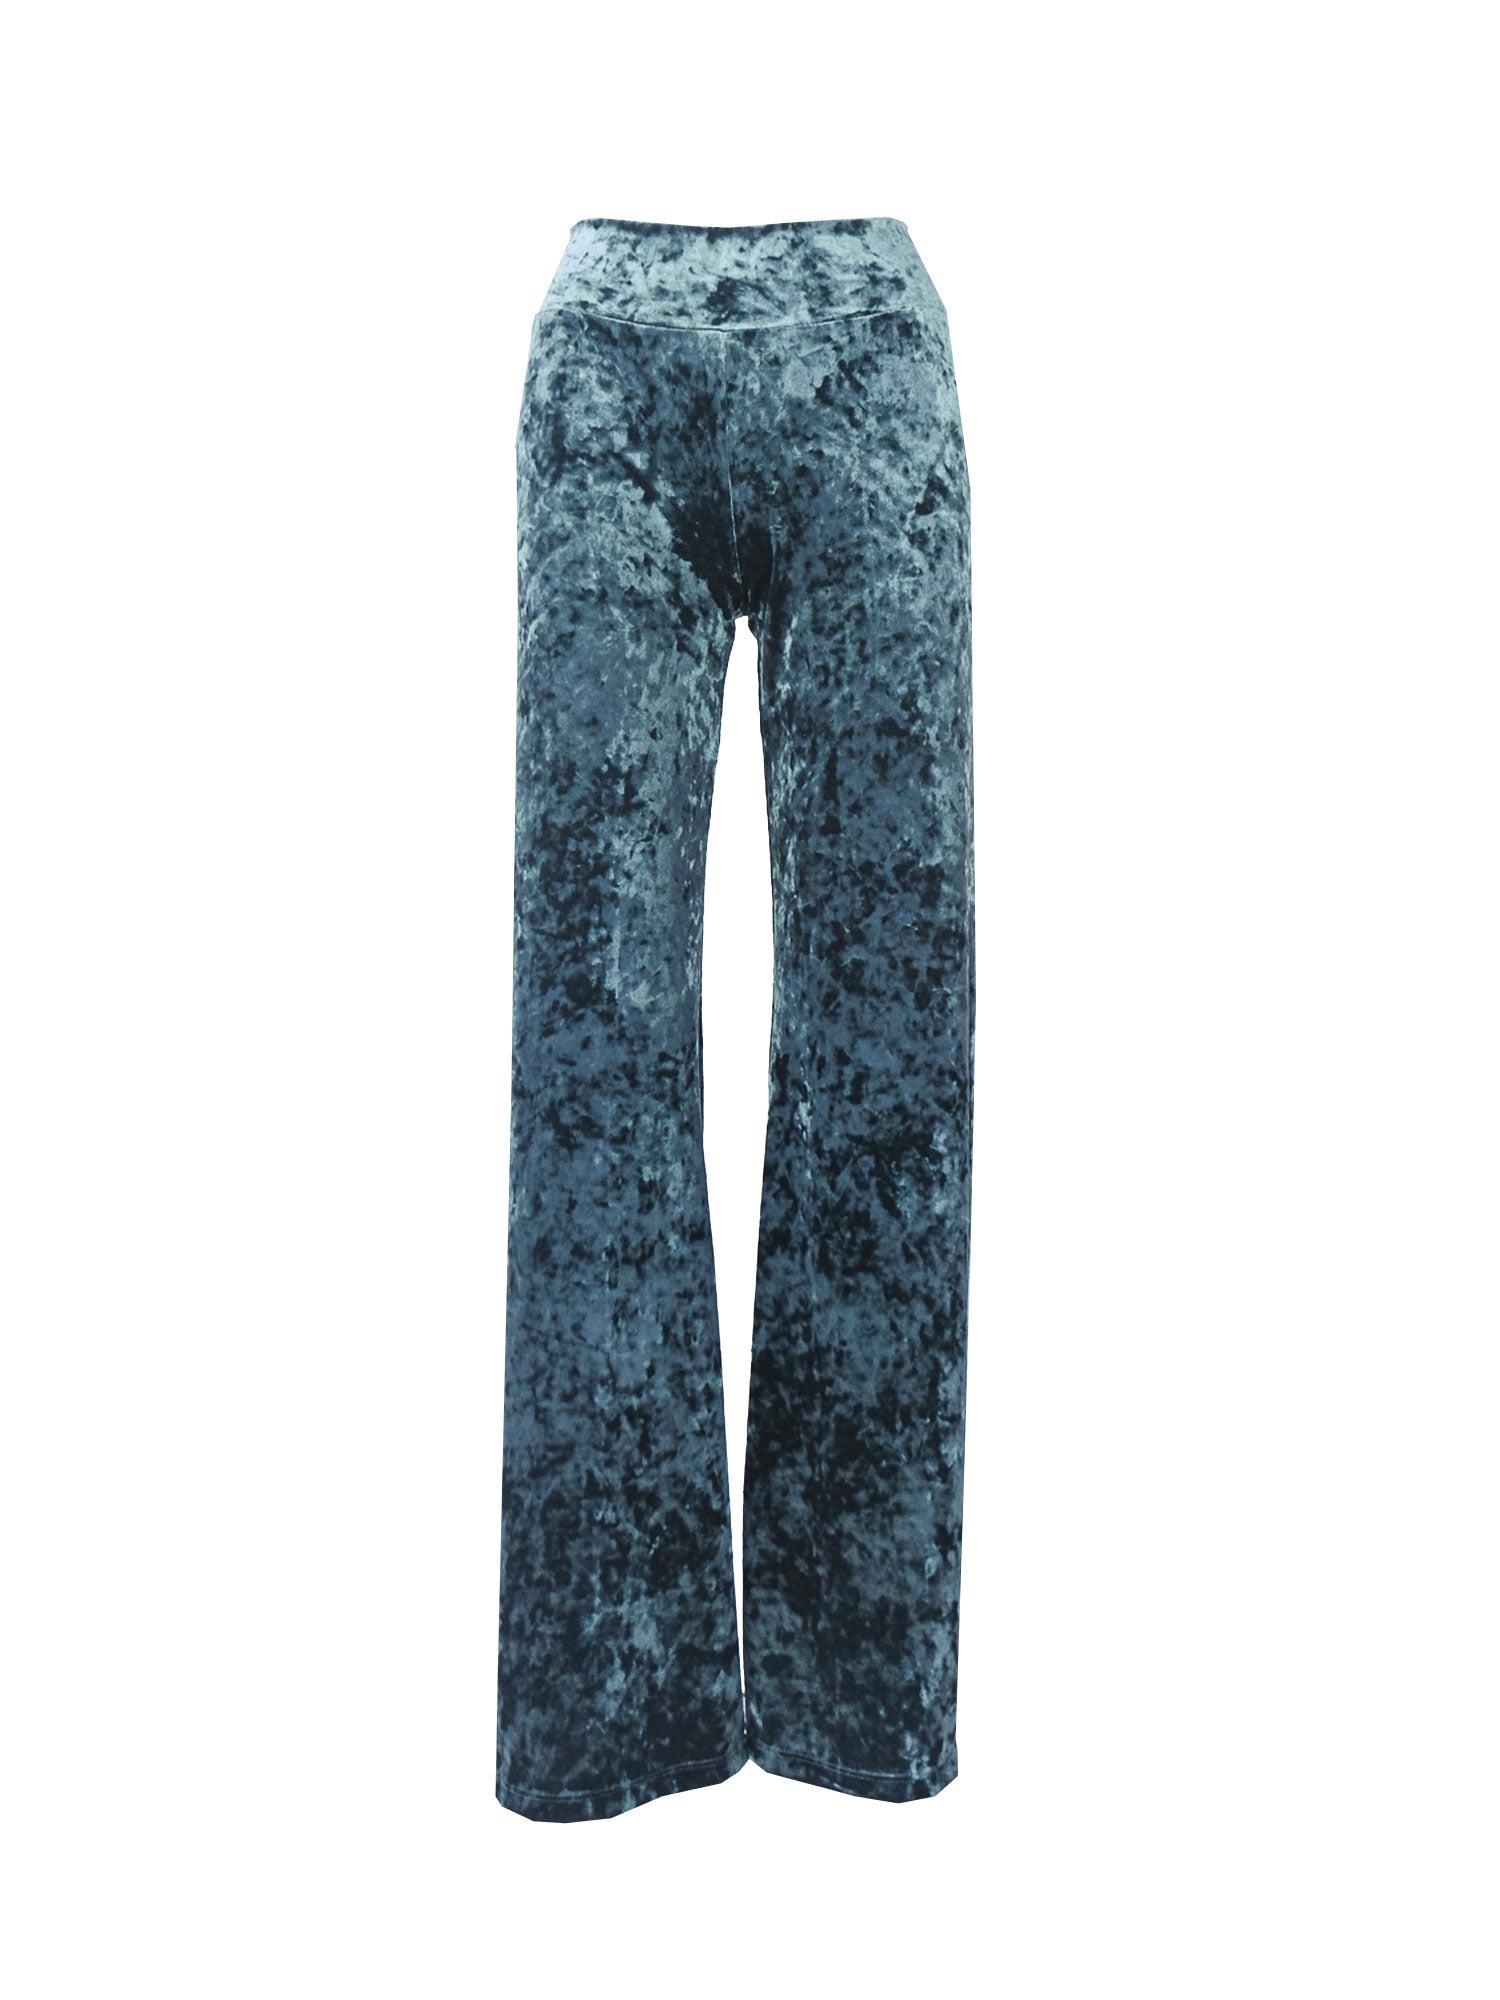 MIMI - trousers in green hammered chenille